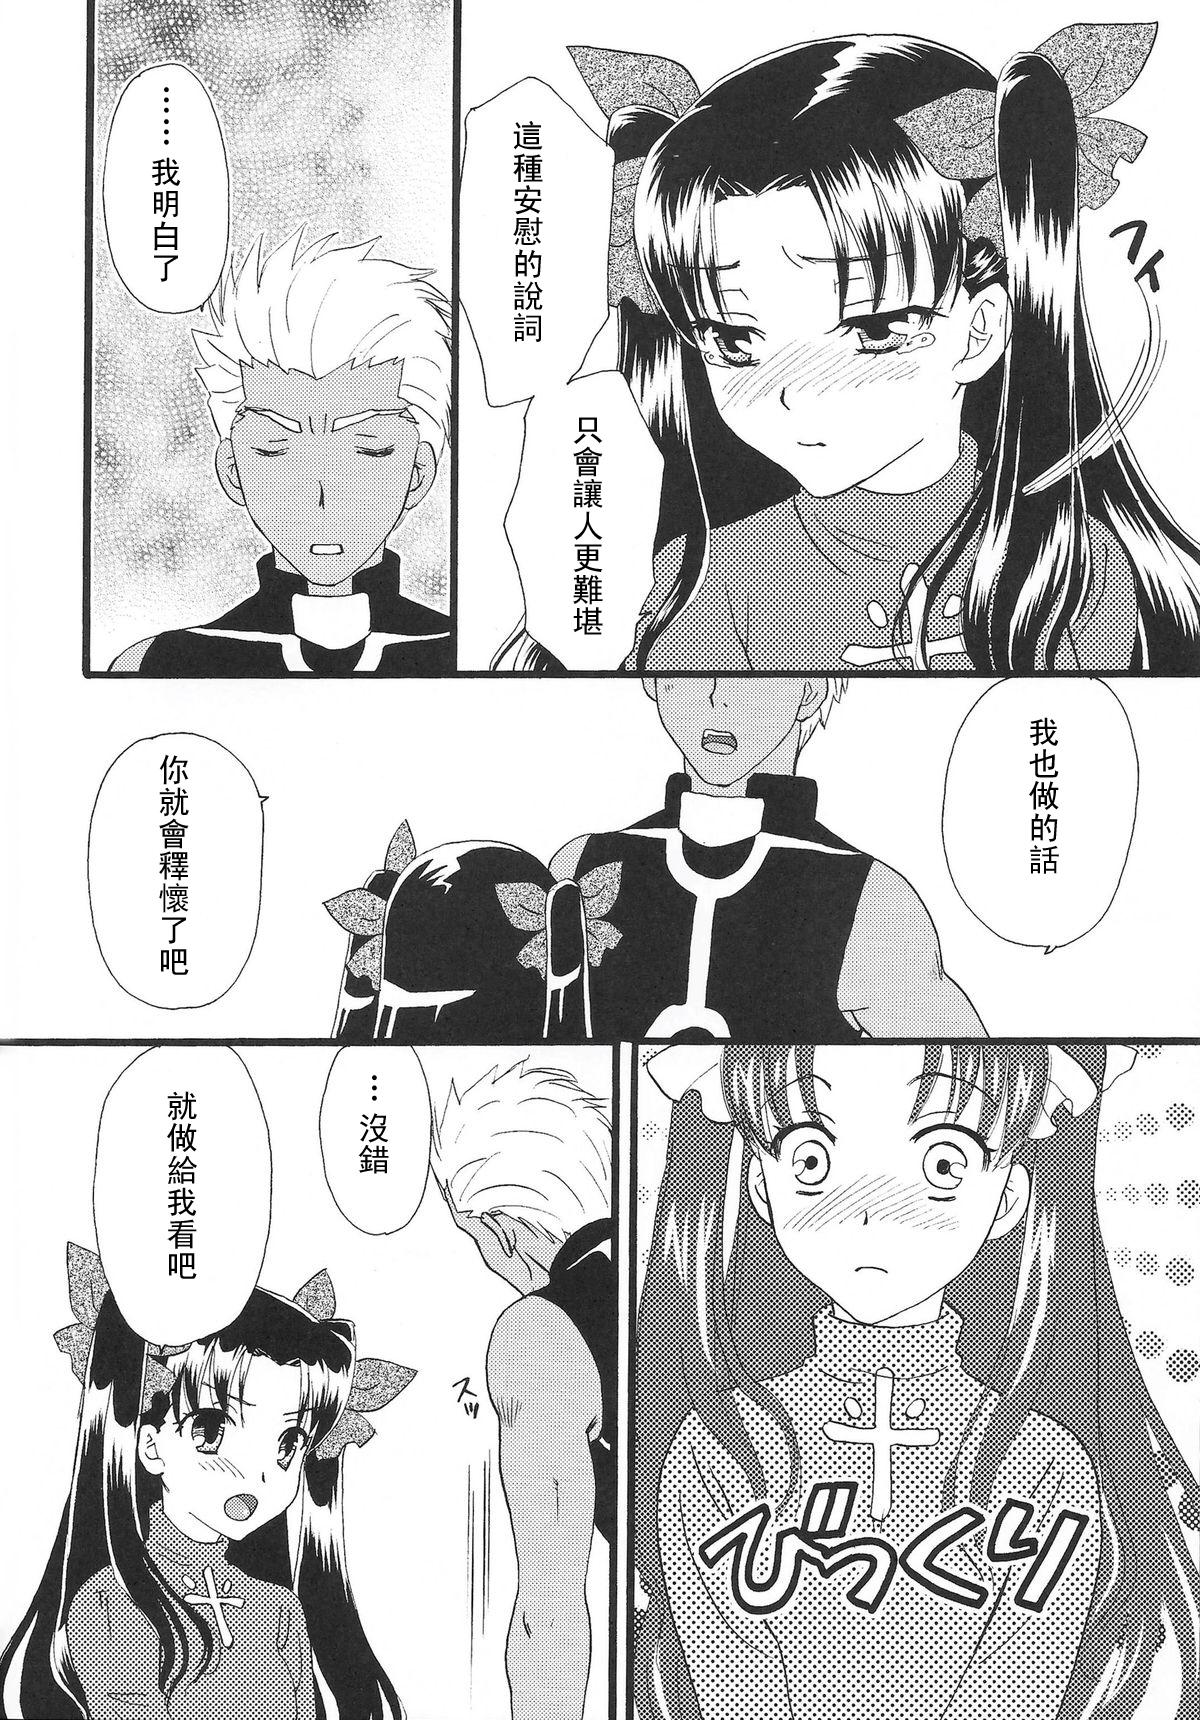 Pussy Orgasm Good-chu!×2 - Fate stay night Pussy Lick - Page 11